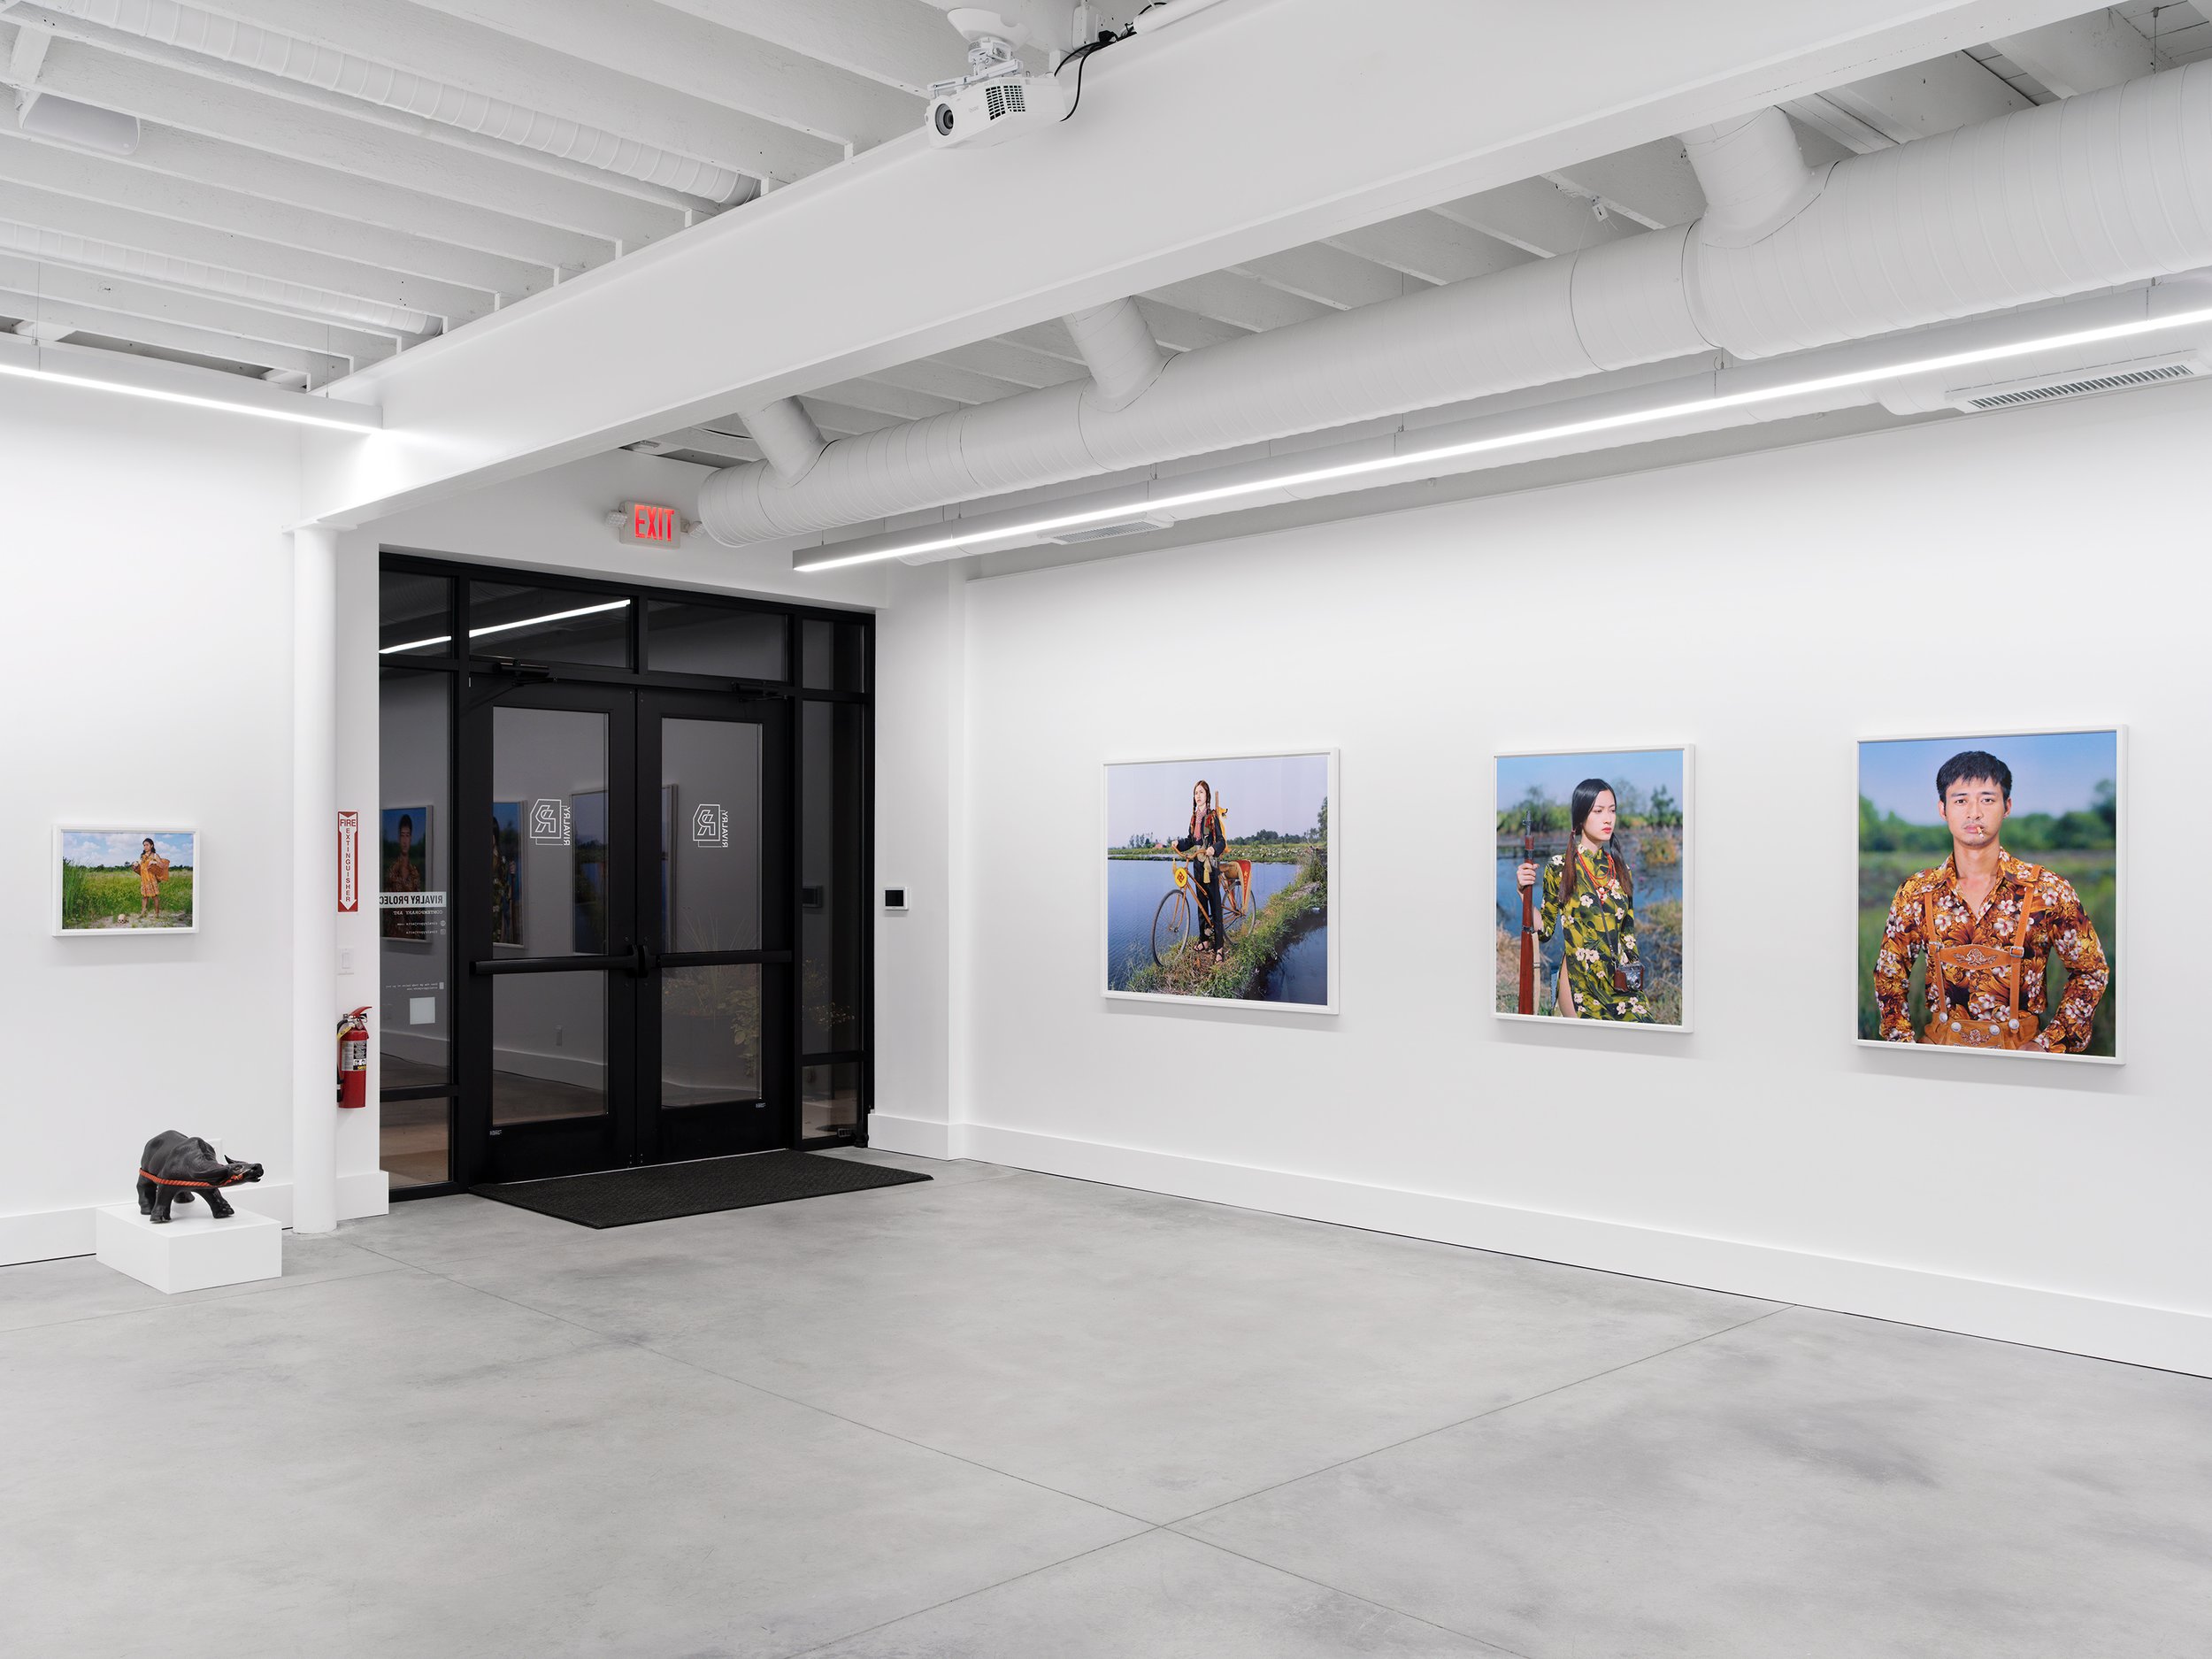  Installation view of Olivier Laude:   Chiến Thắng Ba Tơ left to right:  រាជធានីភីង, Untitled (Buffalo),   Chiến Thắng Ba Tơ, Sis{Quynh}, Linh,   